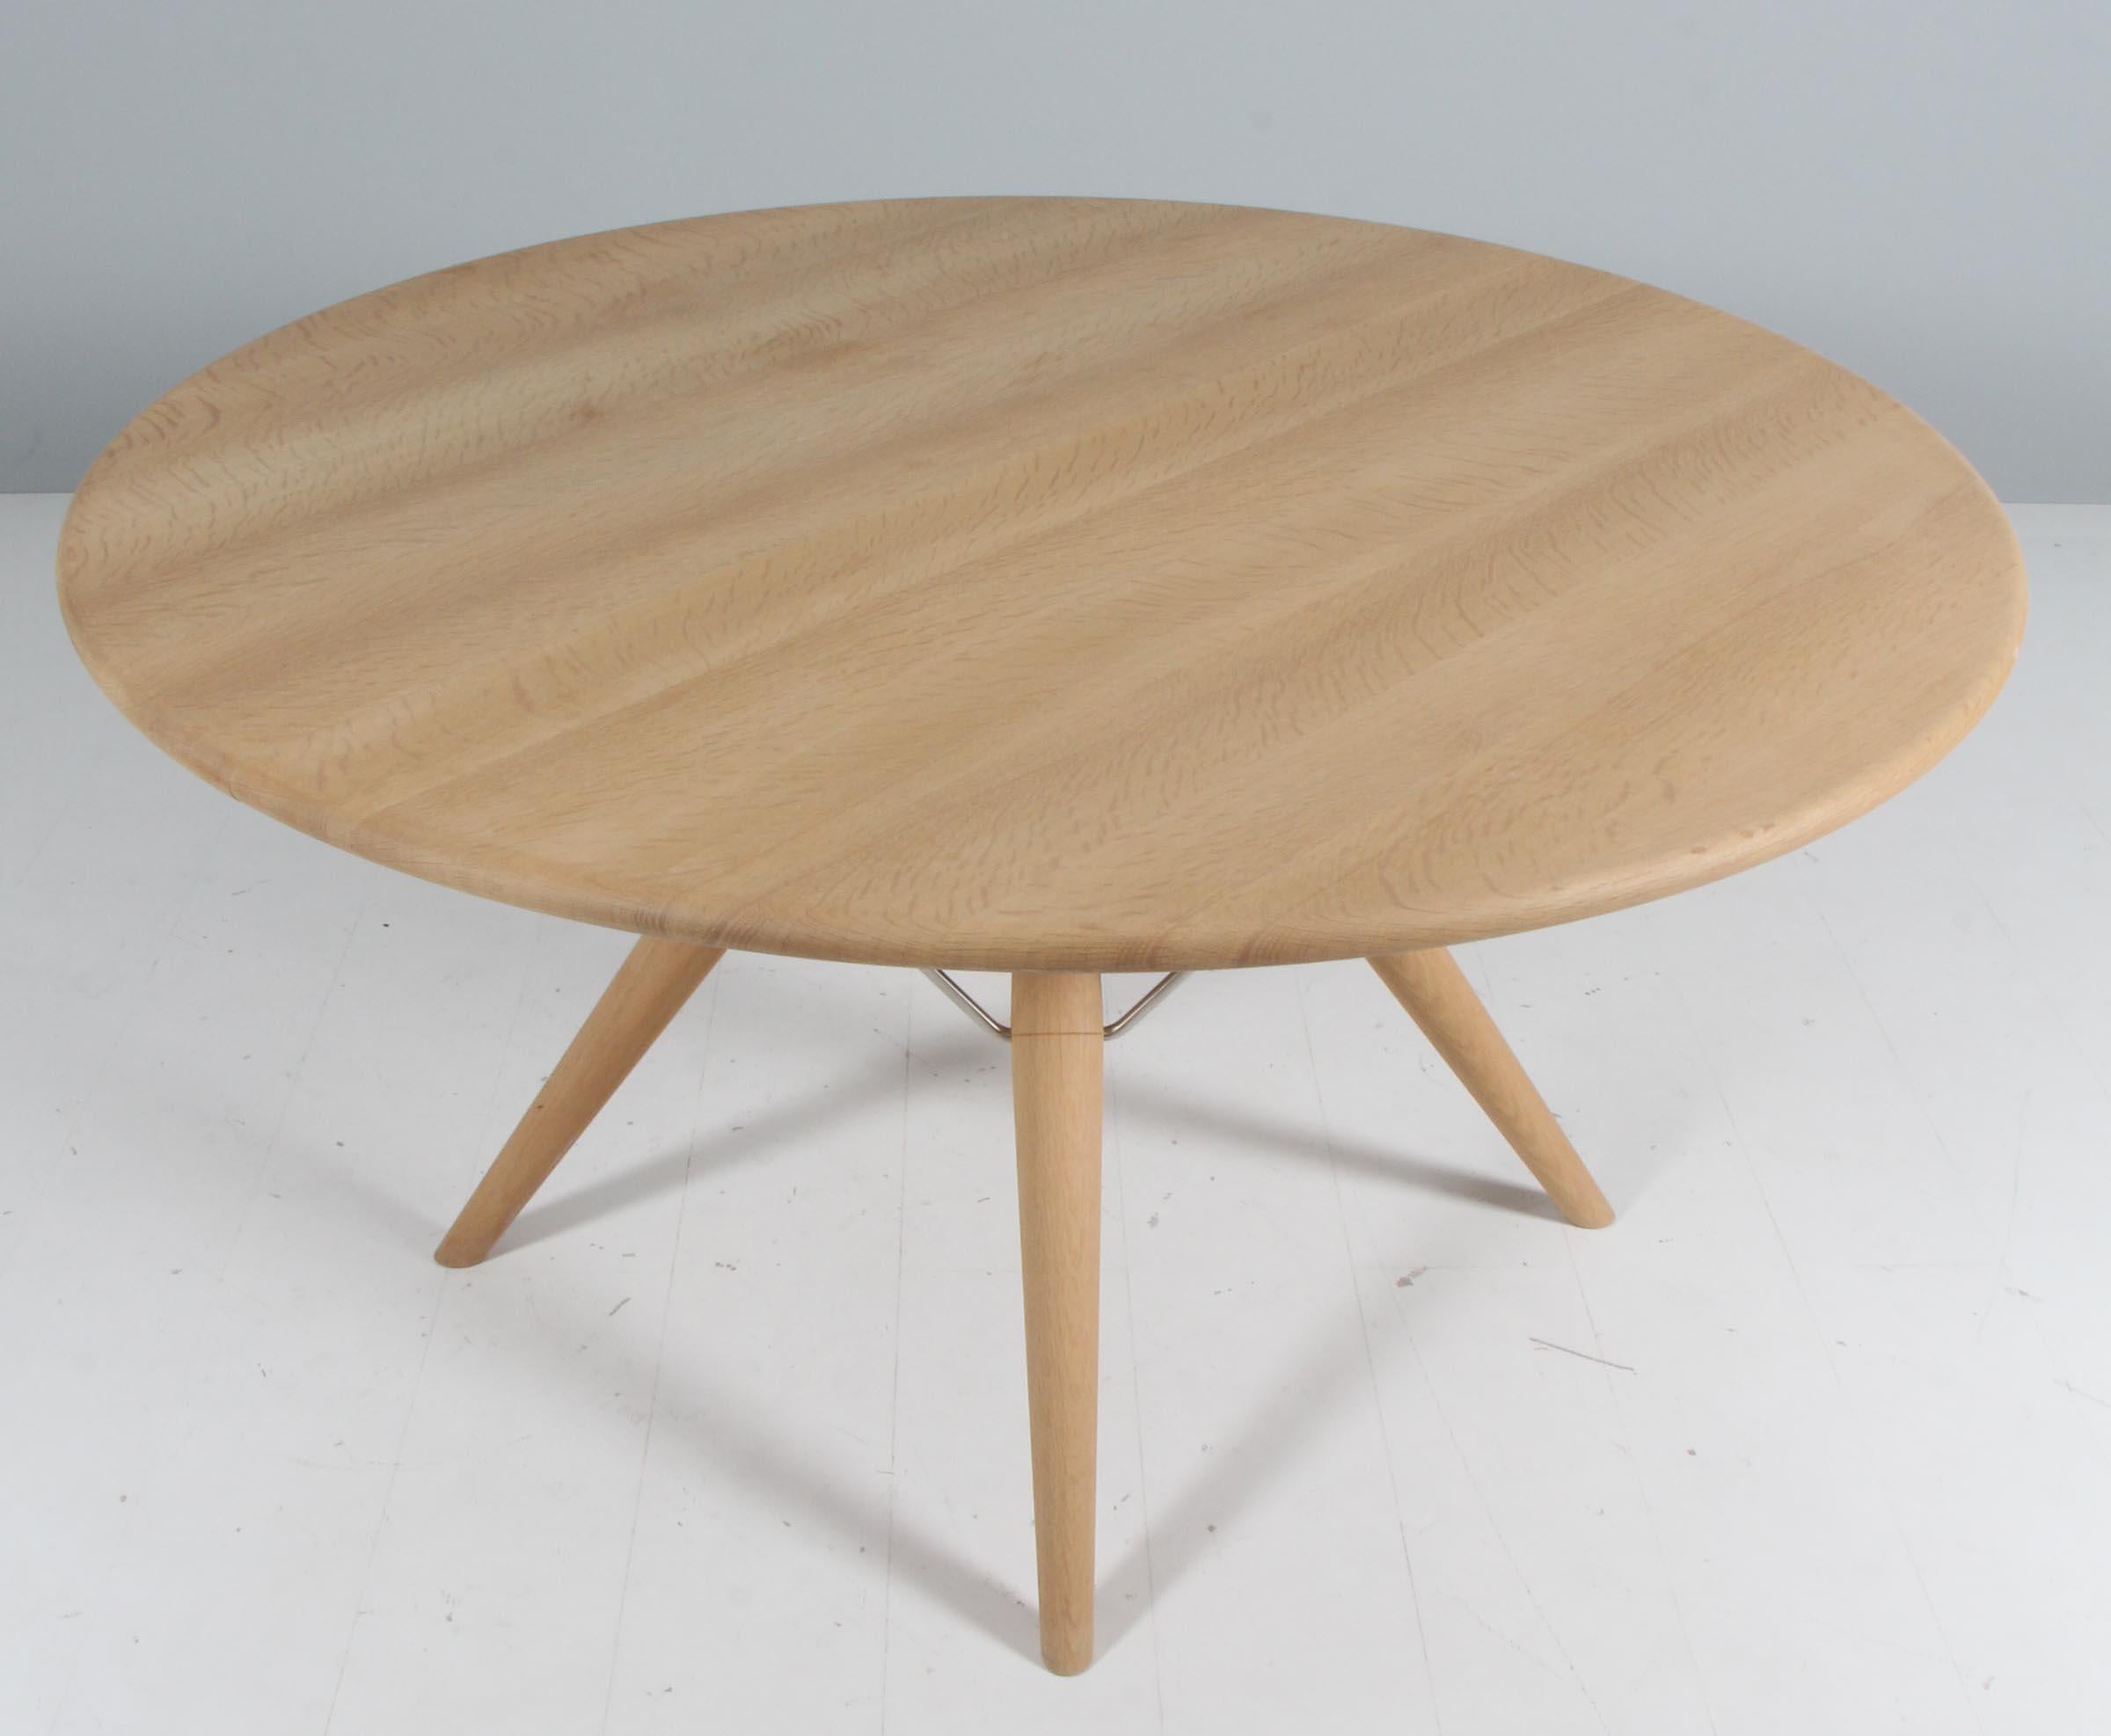 Hans J. Wegner round dining table in solid soap treated oak. Two extension leafes, 60 cm each.

Made by PP møbler, model PP75.